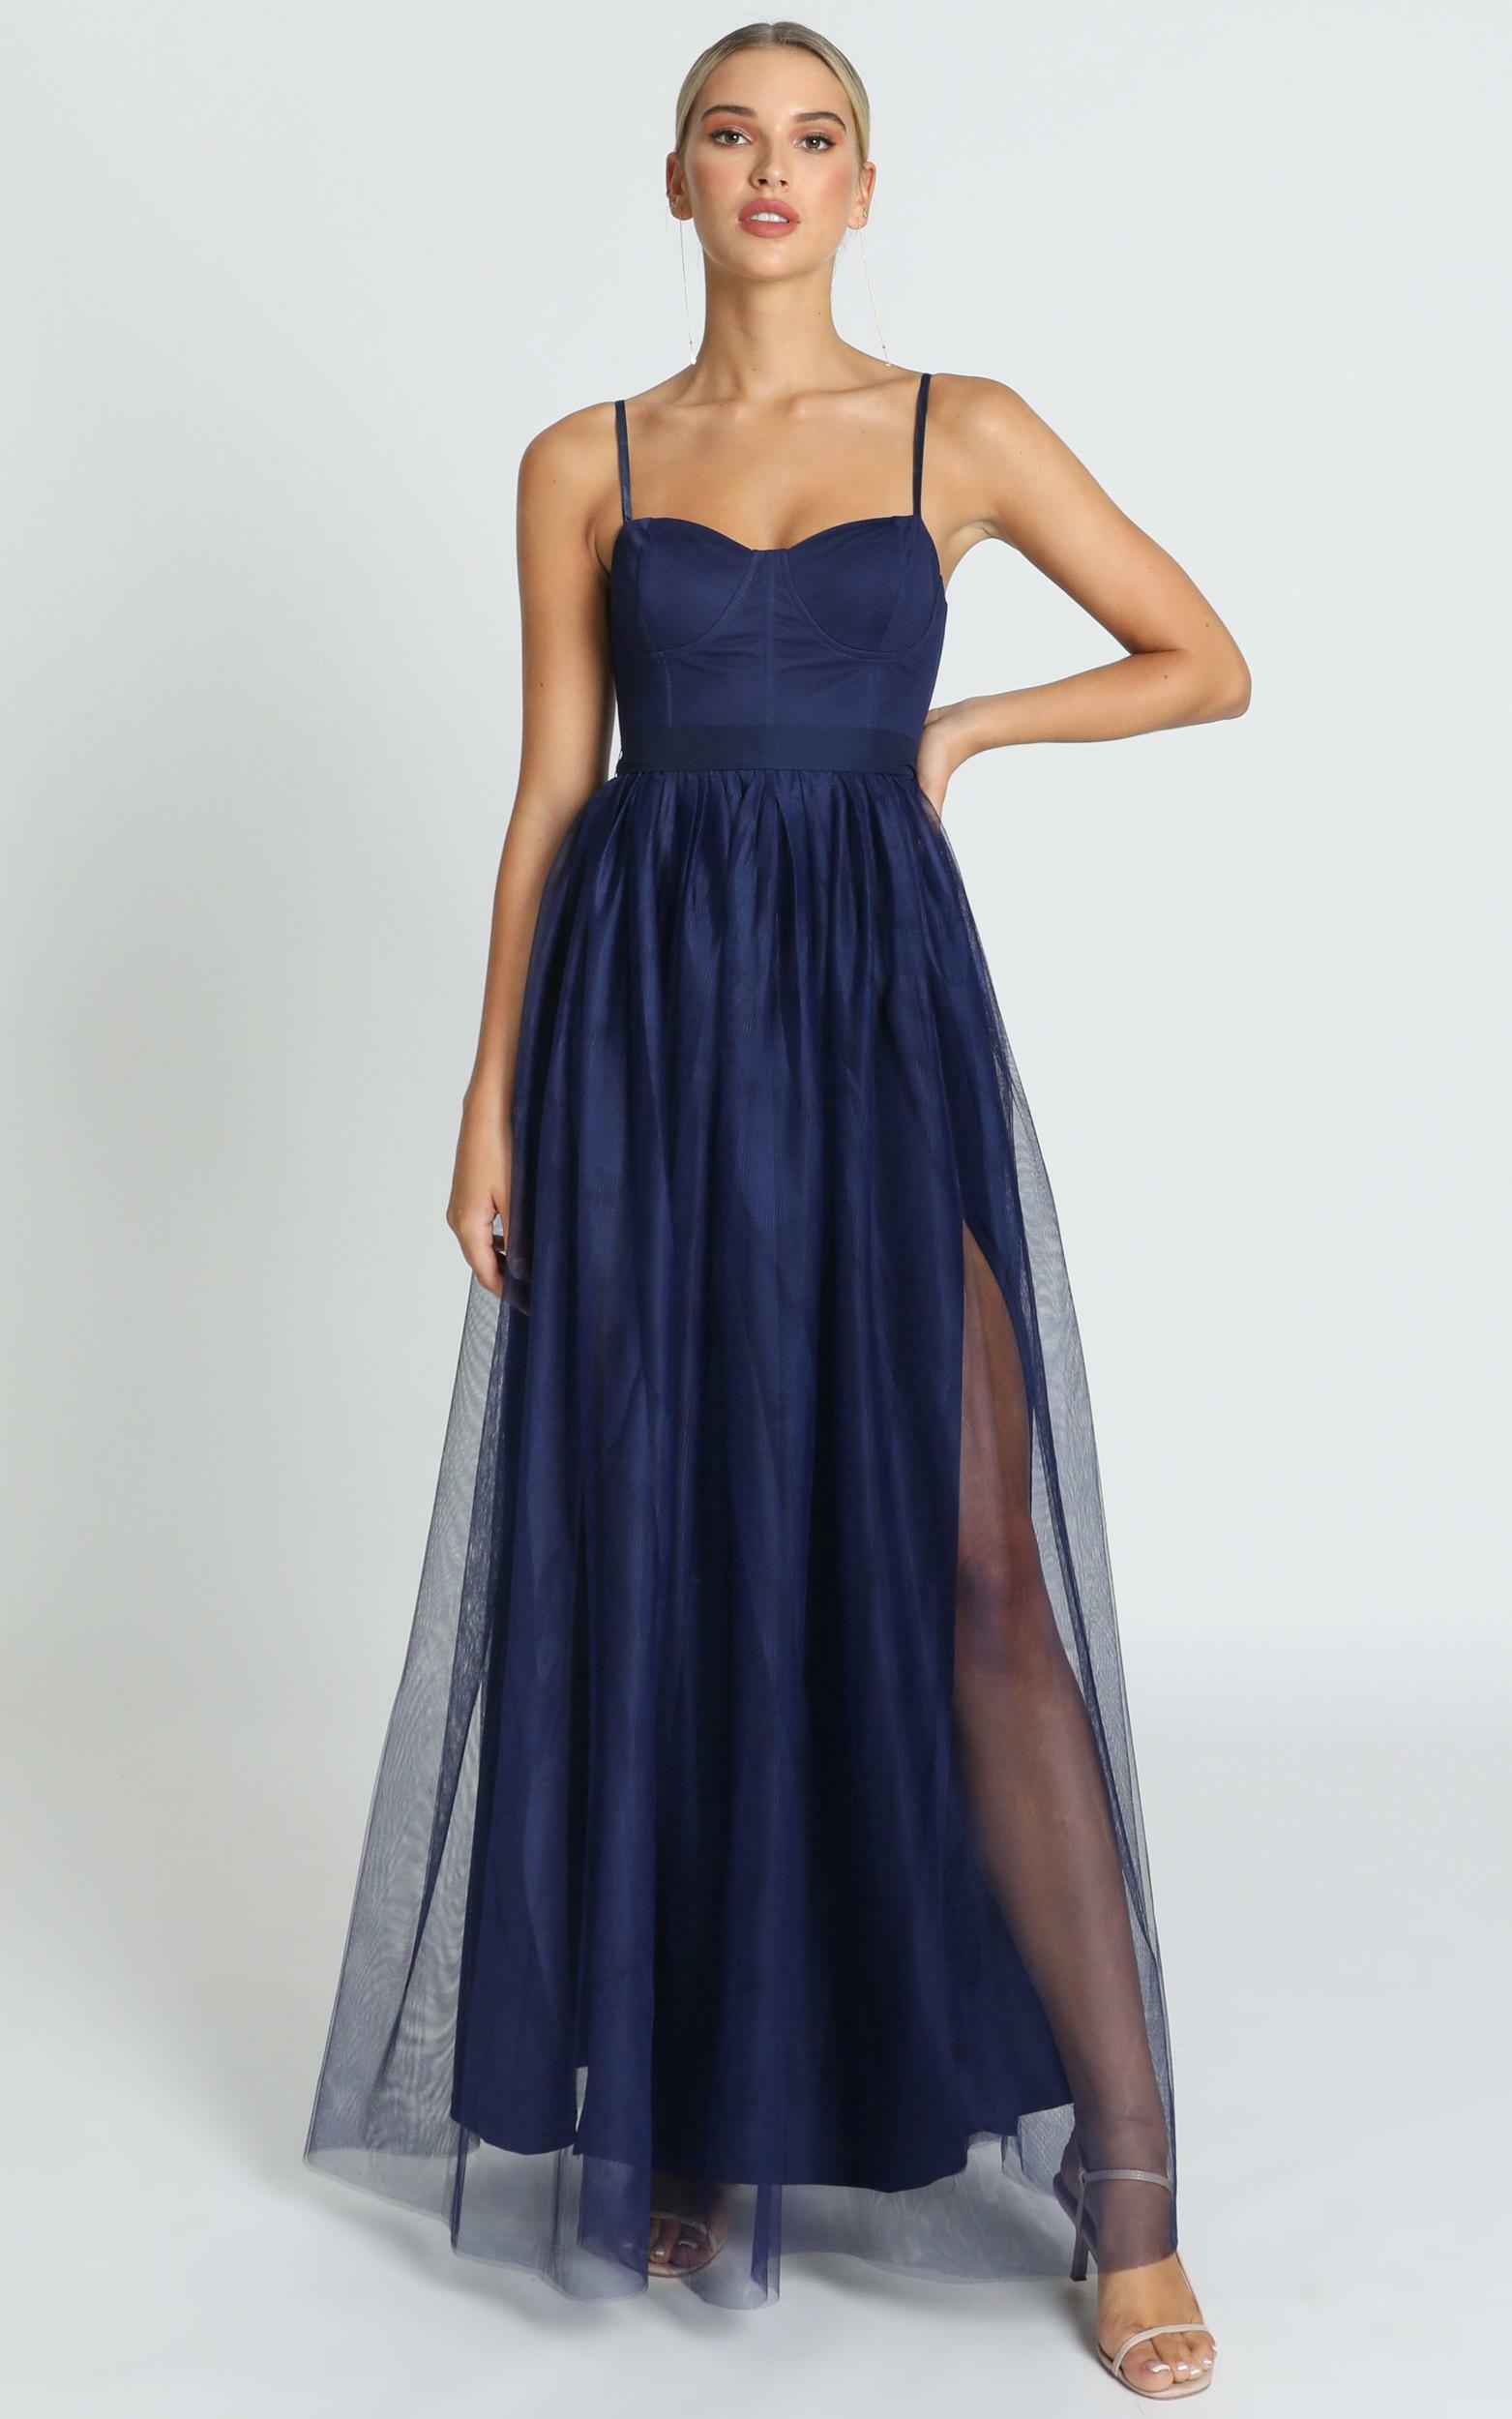 At The Altar Bodice Maxi Dress in Navy - 04, NVY4, hi-res image number null